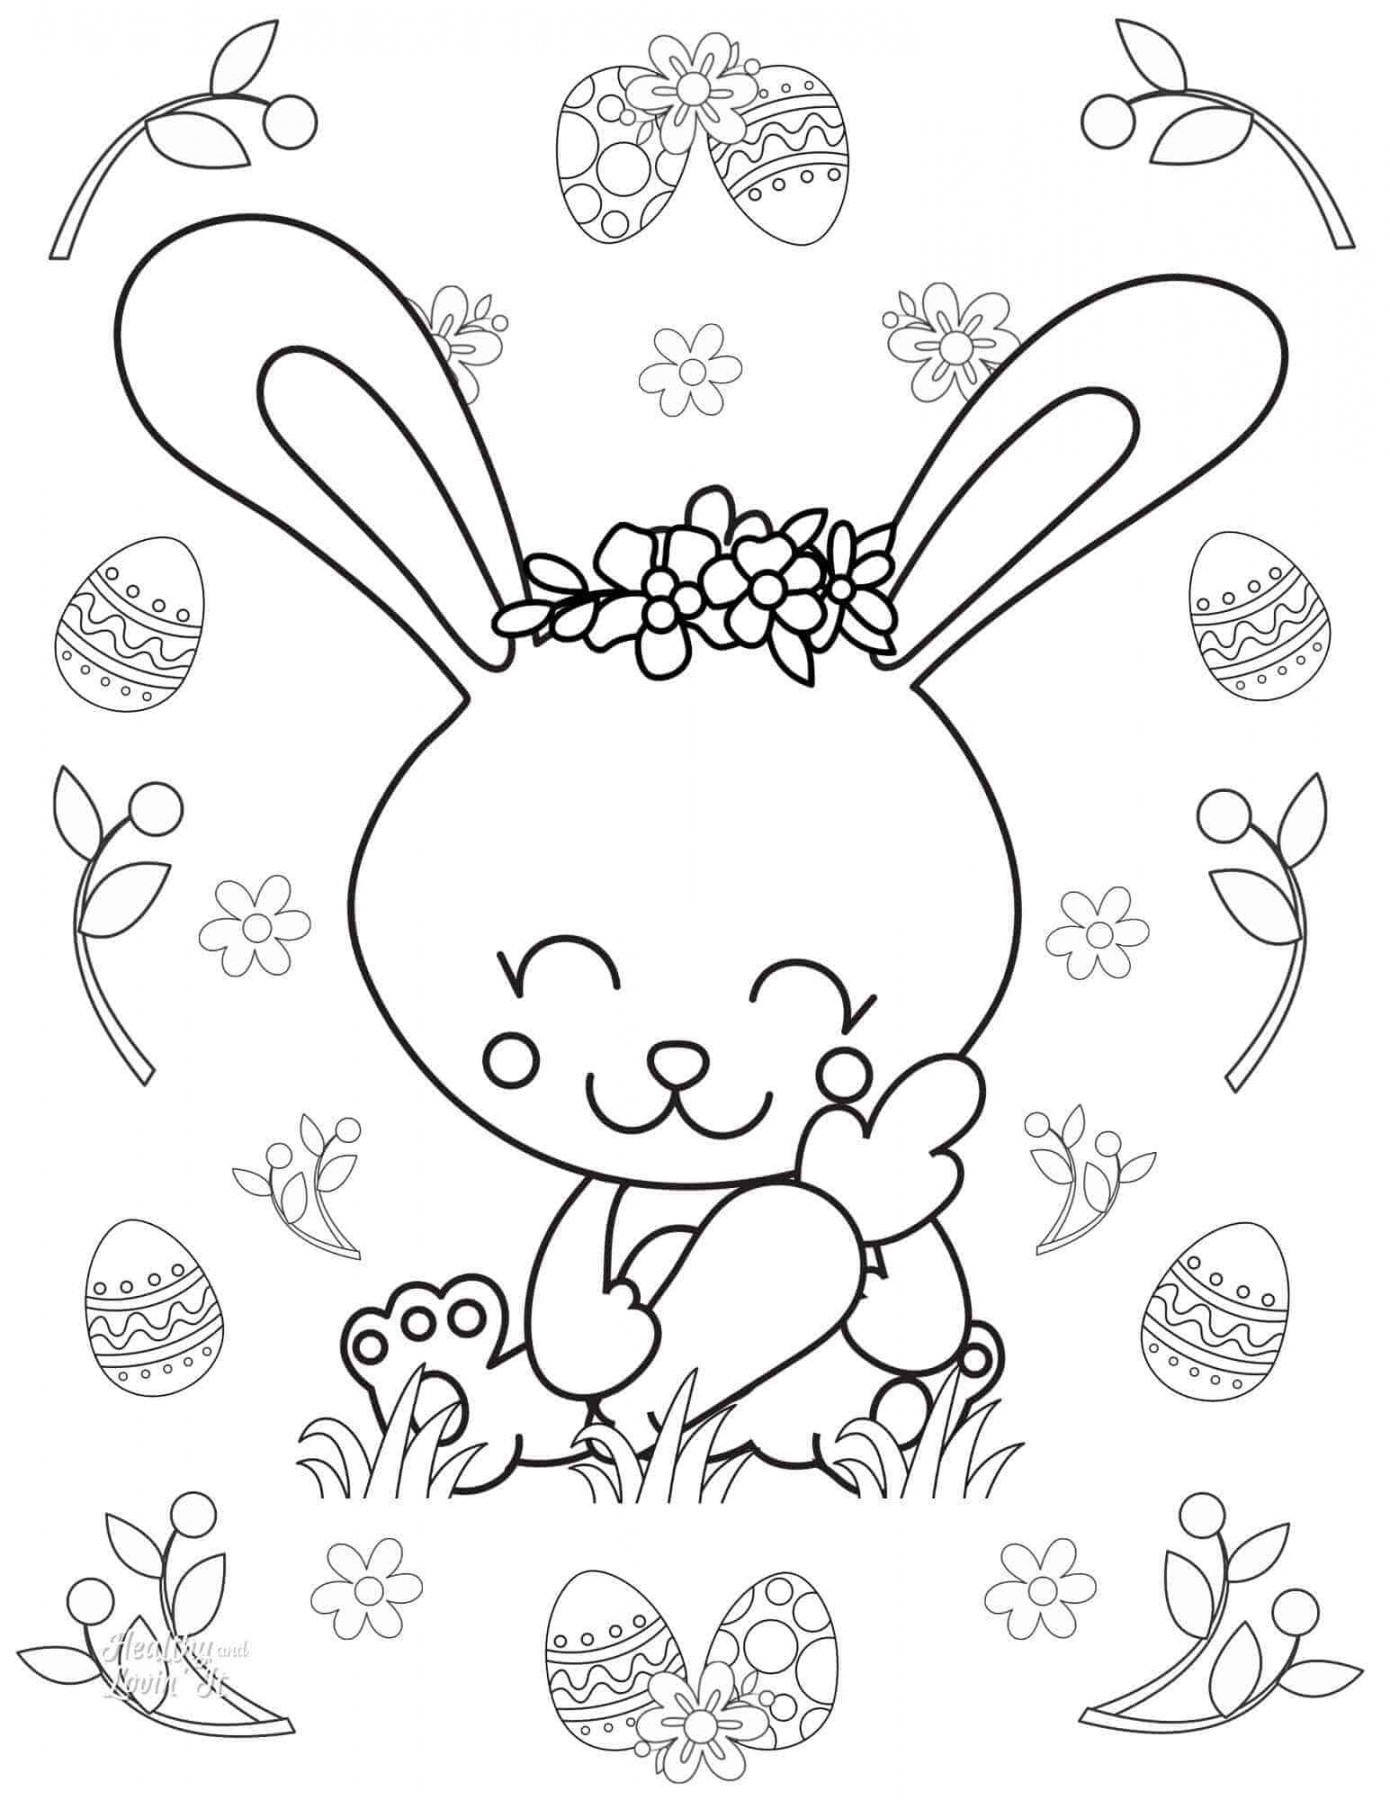 Easter Free Printable Coloring Pages - Printable - Cute Easter Coloring Pages - Free Printables!